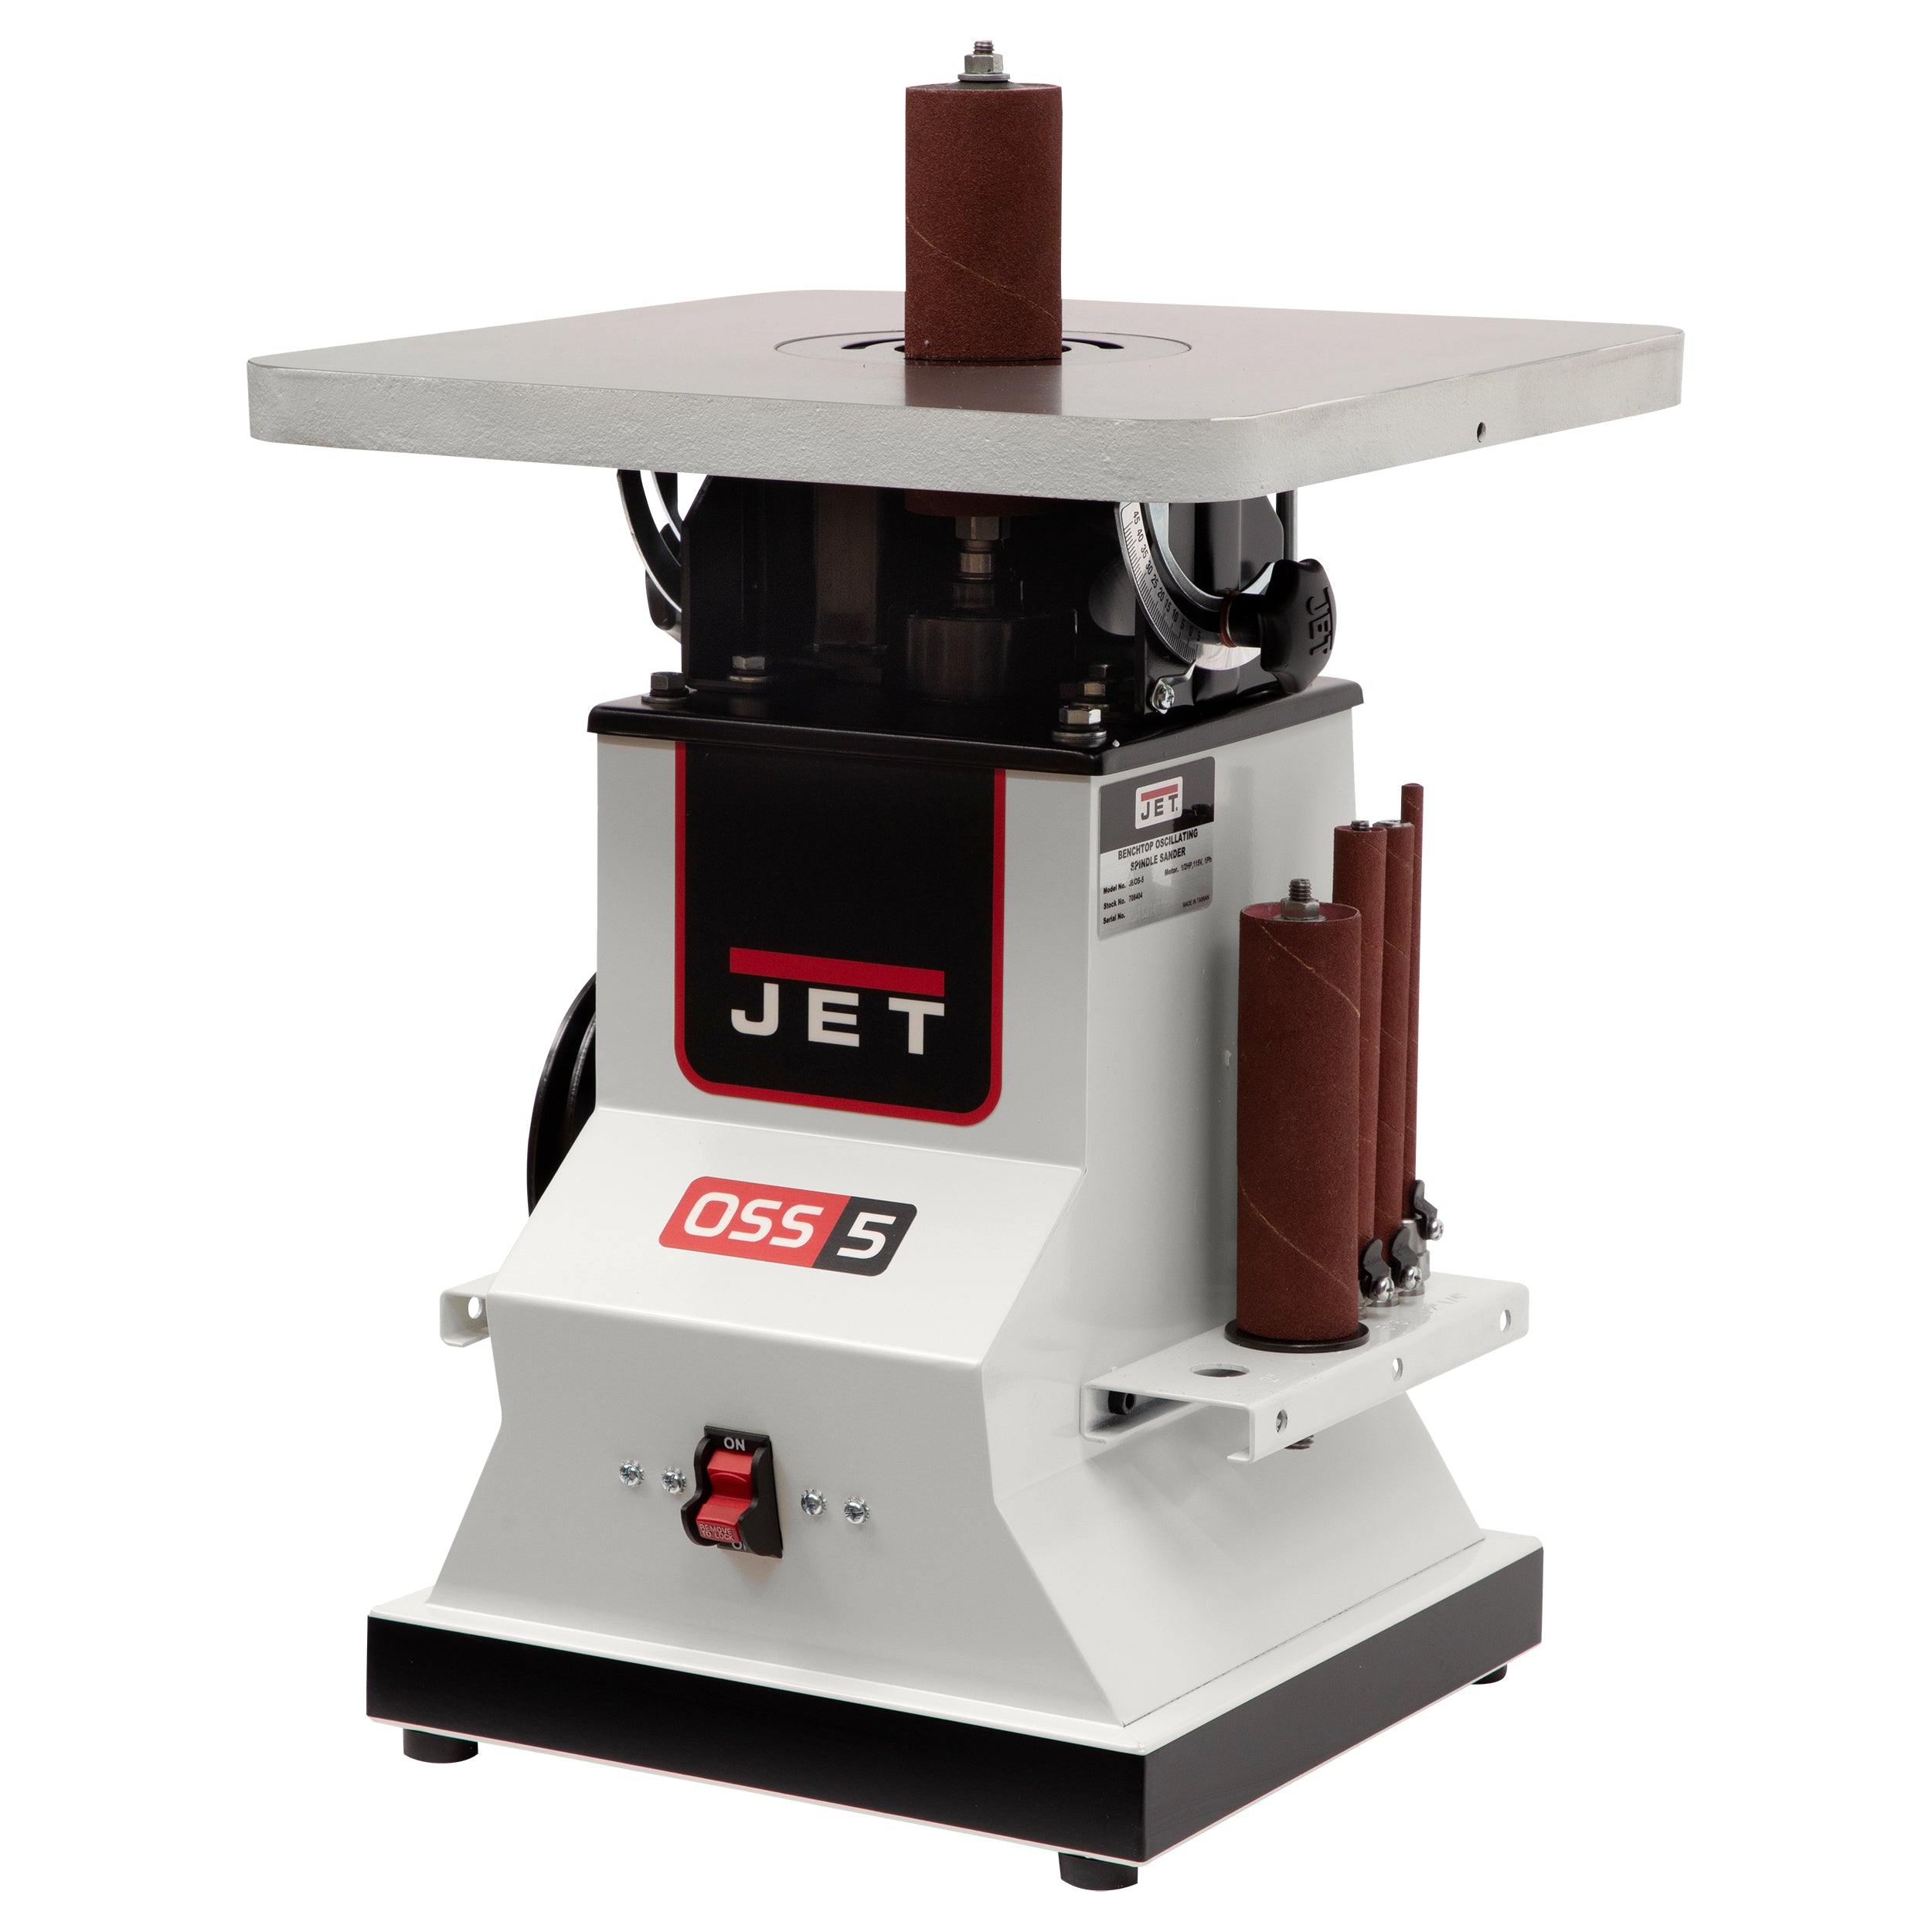  JET 1-1/2-HP Spindle Shaper, 18 x 20 Table, 1Ph 115